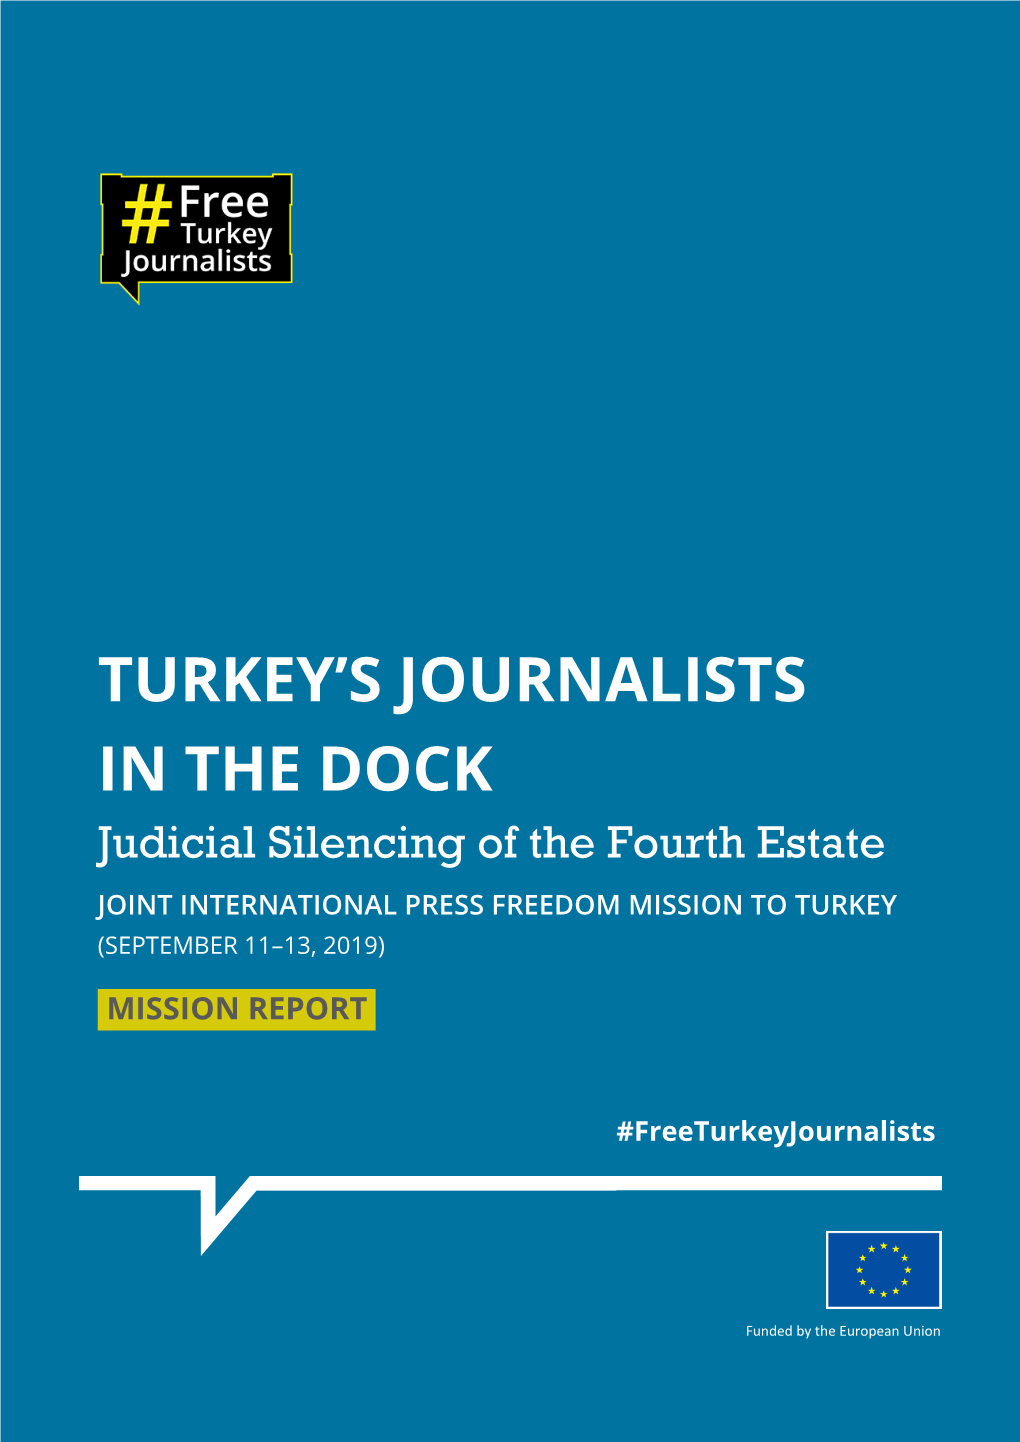 Turkey's Journalists in the Dock: the Judicial